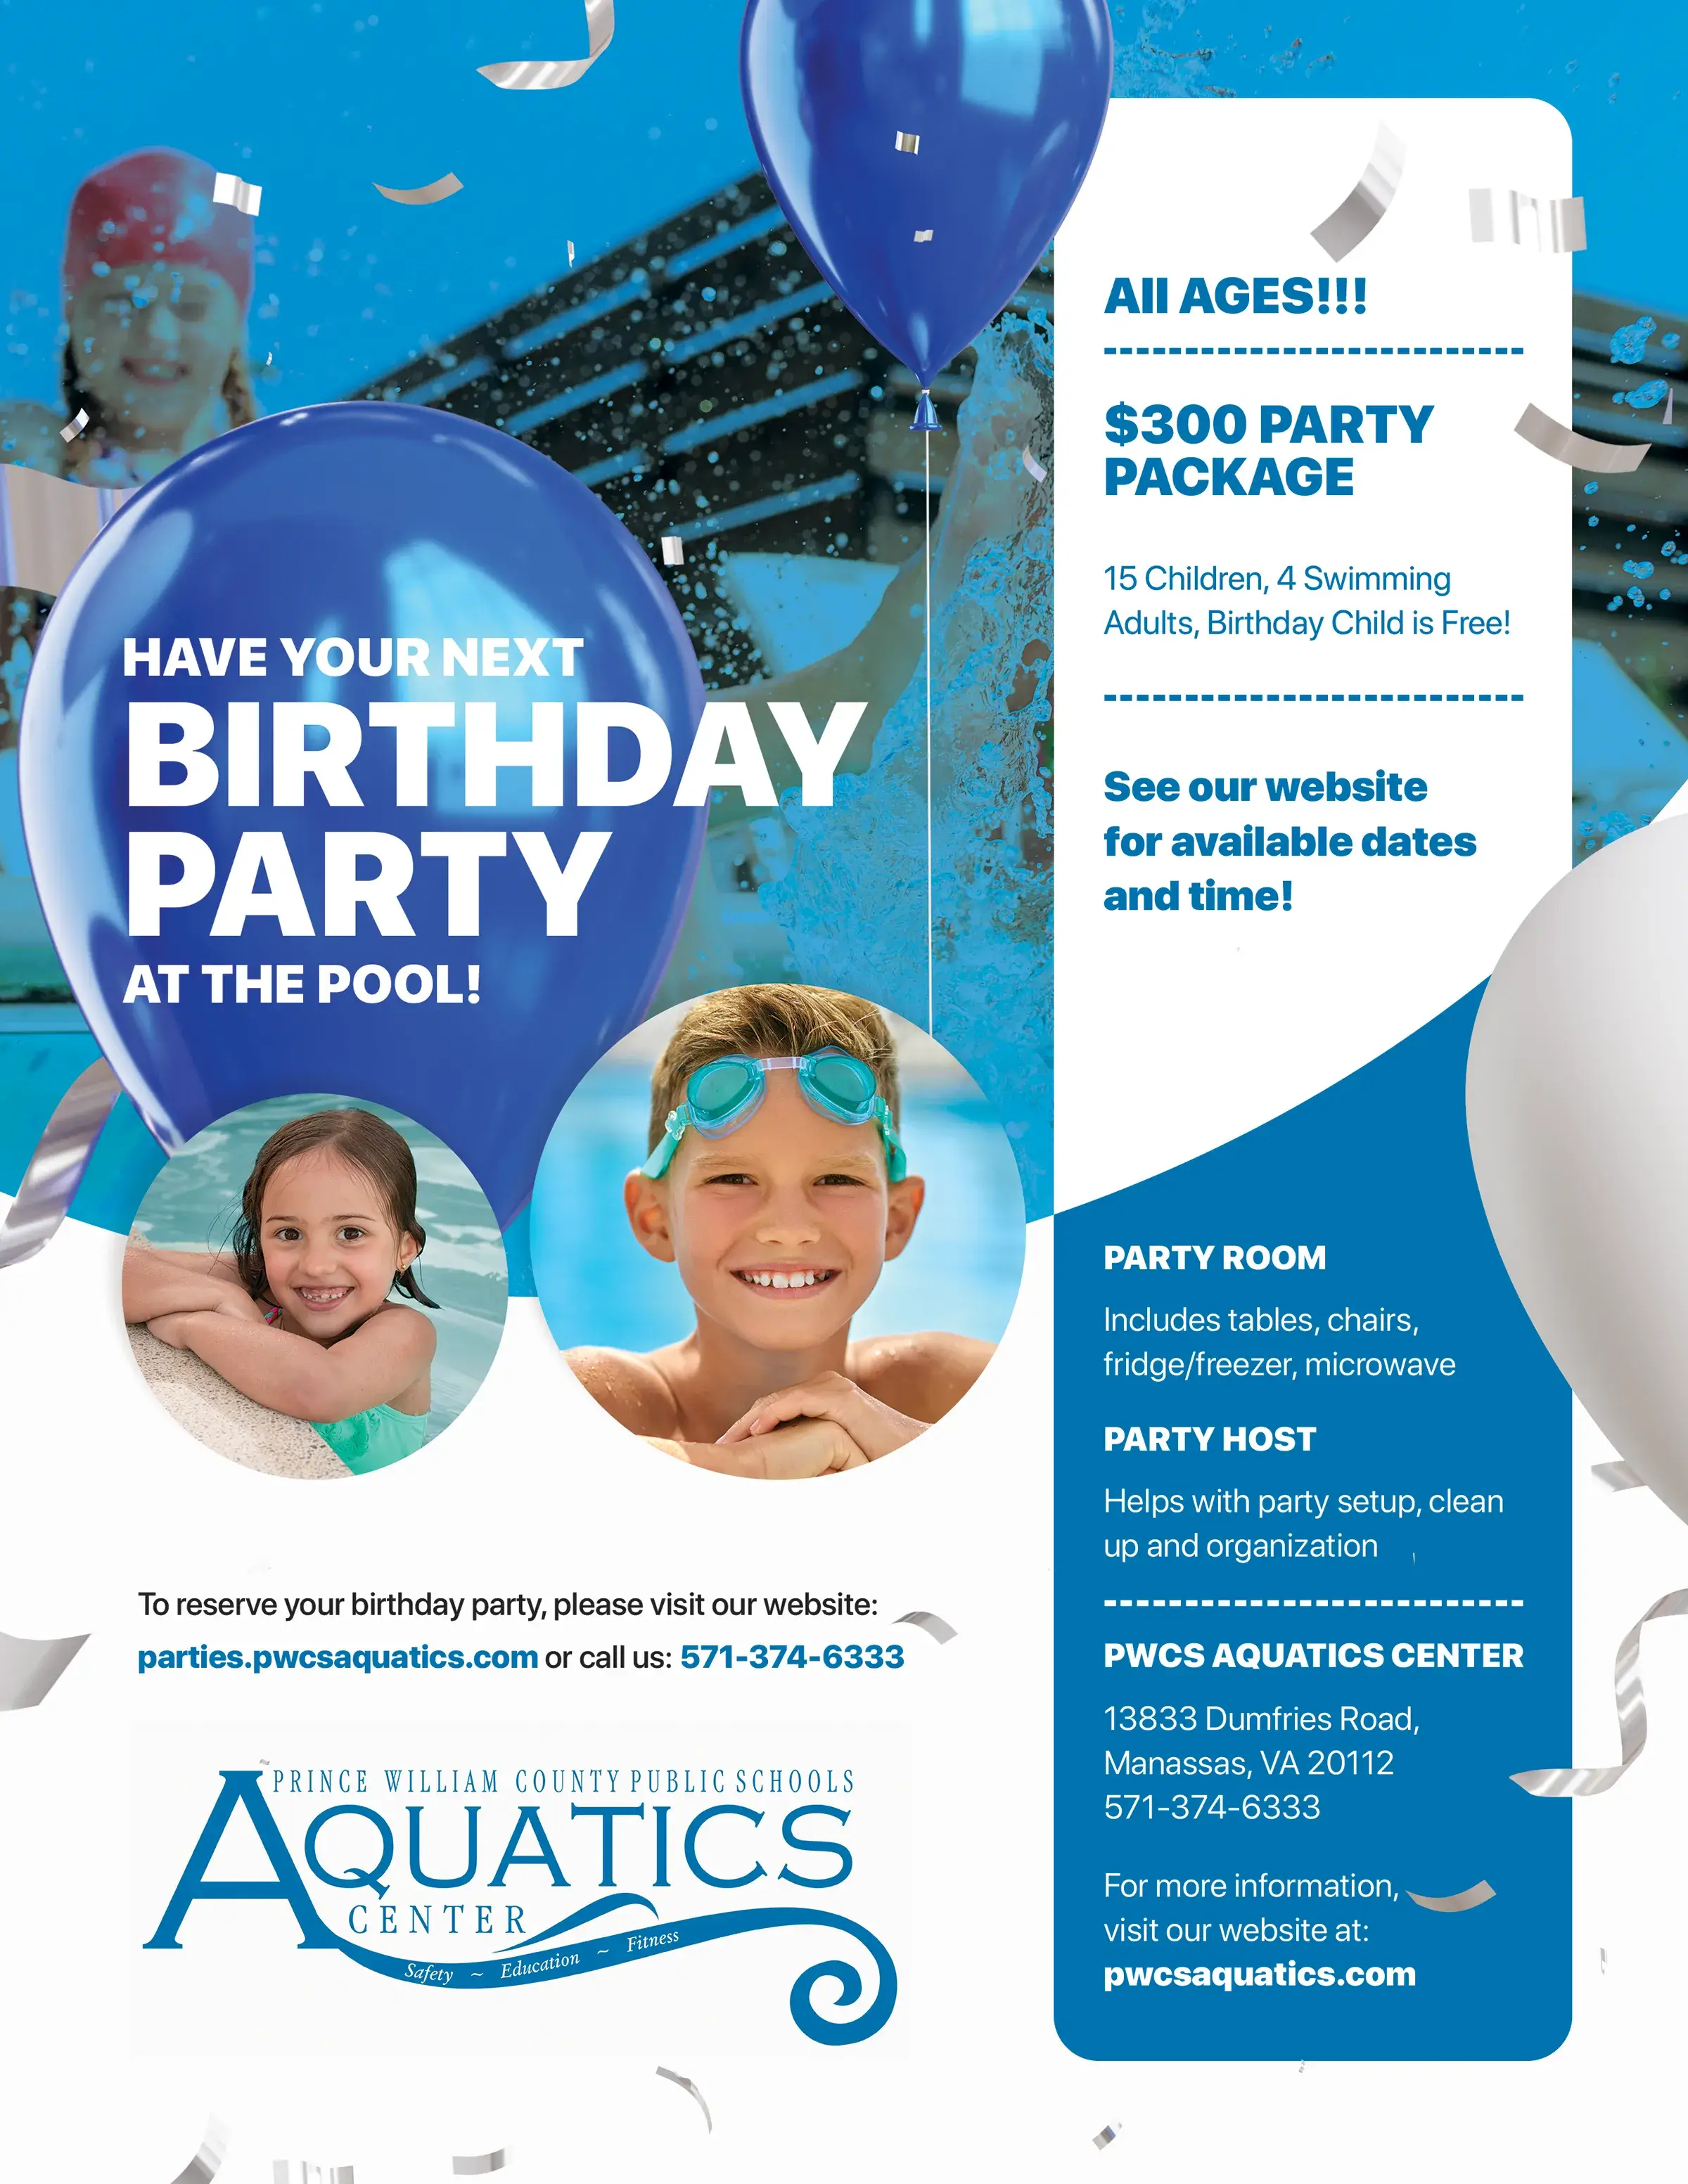 Informational advertisement flyer for birthday parties at the Aquatics Center. All information listed on this flyer is also available above on the page. Photo links to the reservation page for birthday party rentals.